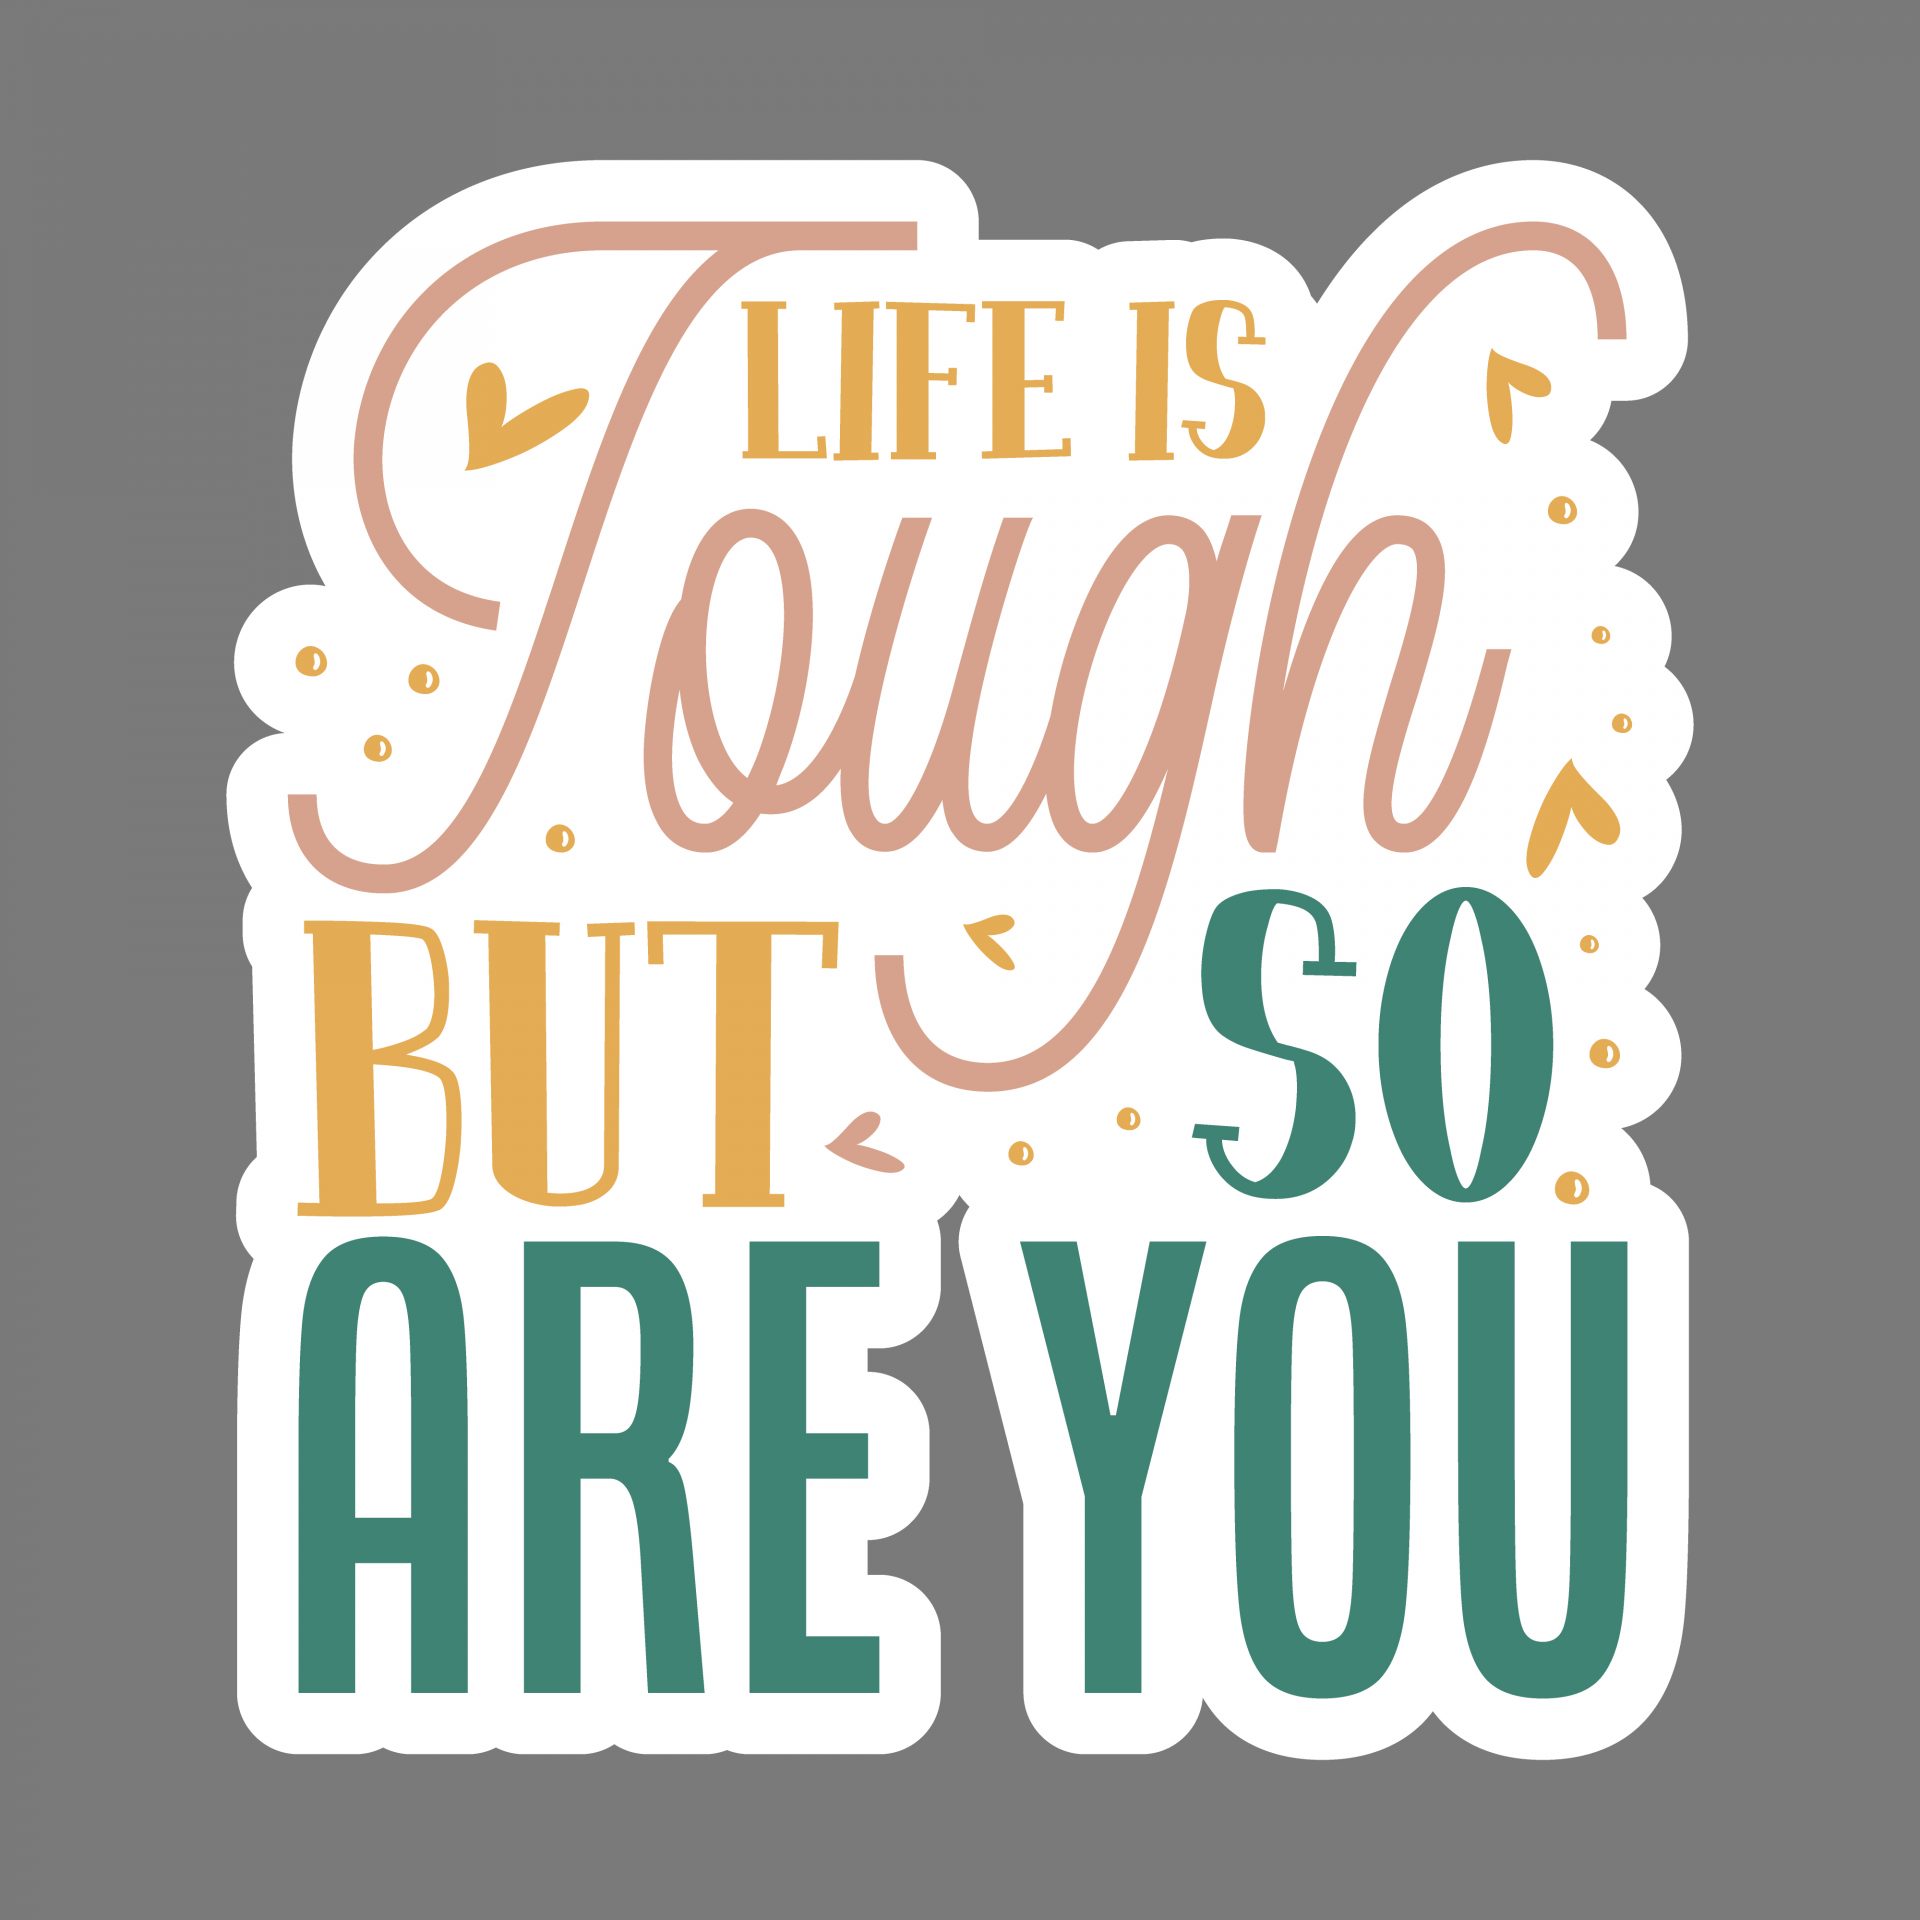 Life is tough, but so are you!